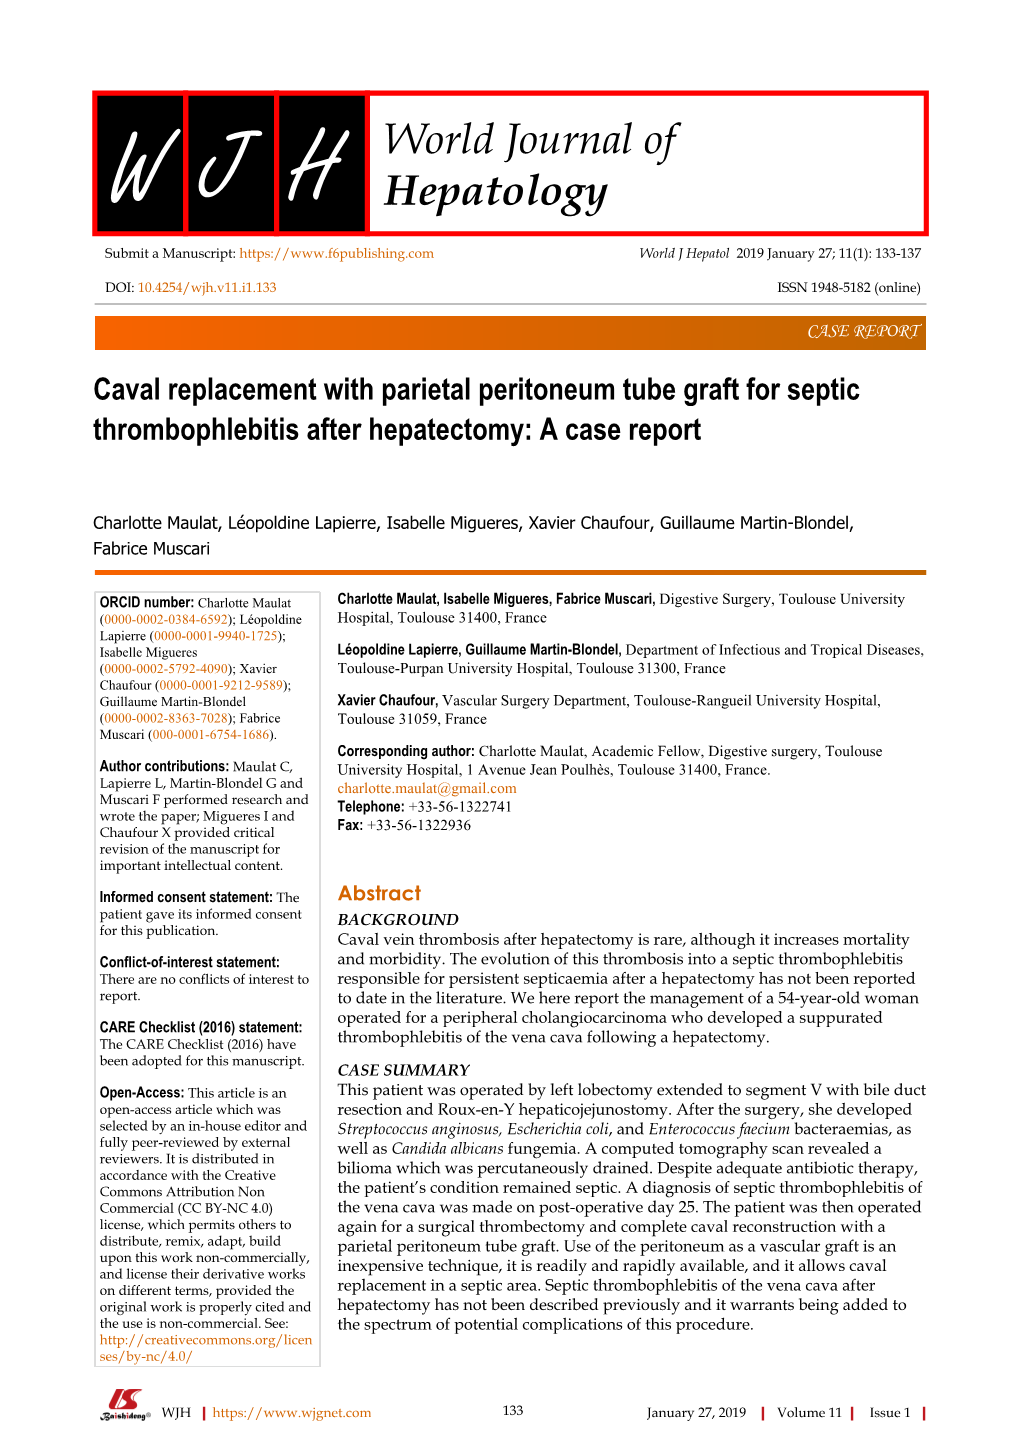 Caval Replacement with Parietal Peritoneum Tube Graft for Septic Thrombophlebitis After Hepatectomy: a Case Report